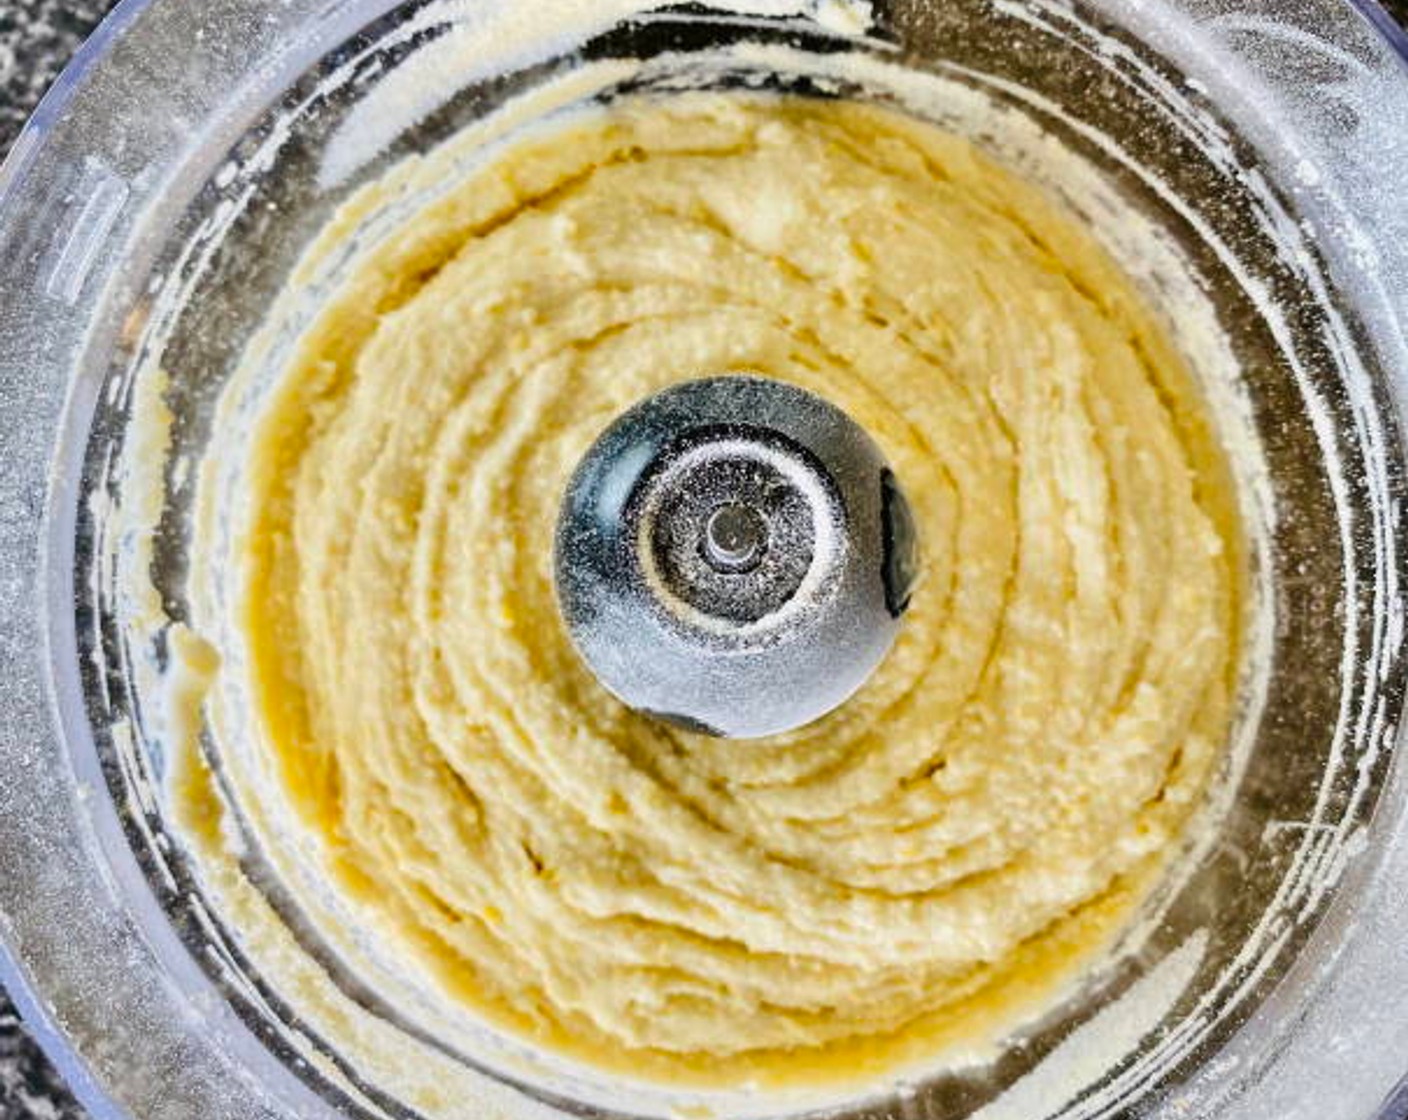 step 2 Add the Butter (1 Tbsp) and combine until you have little crumbs of dough similar to if you were making a crumble. Add the Egg (1) into the mix and pulse or mix by hand until the egg is incorporated.